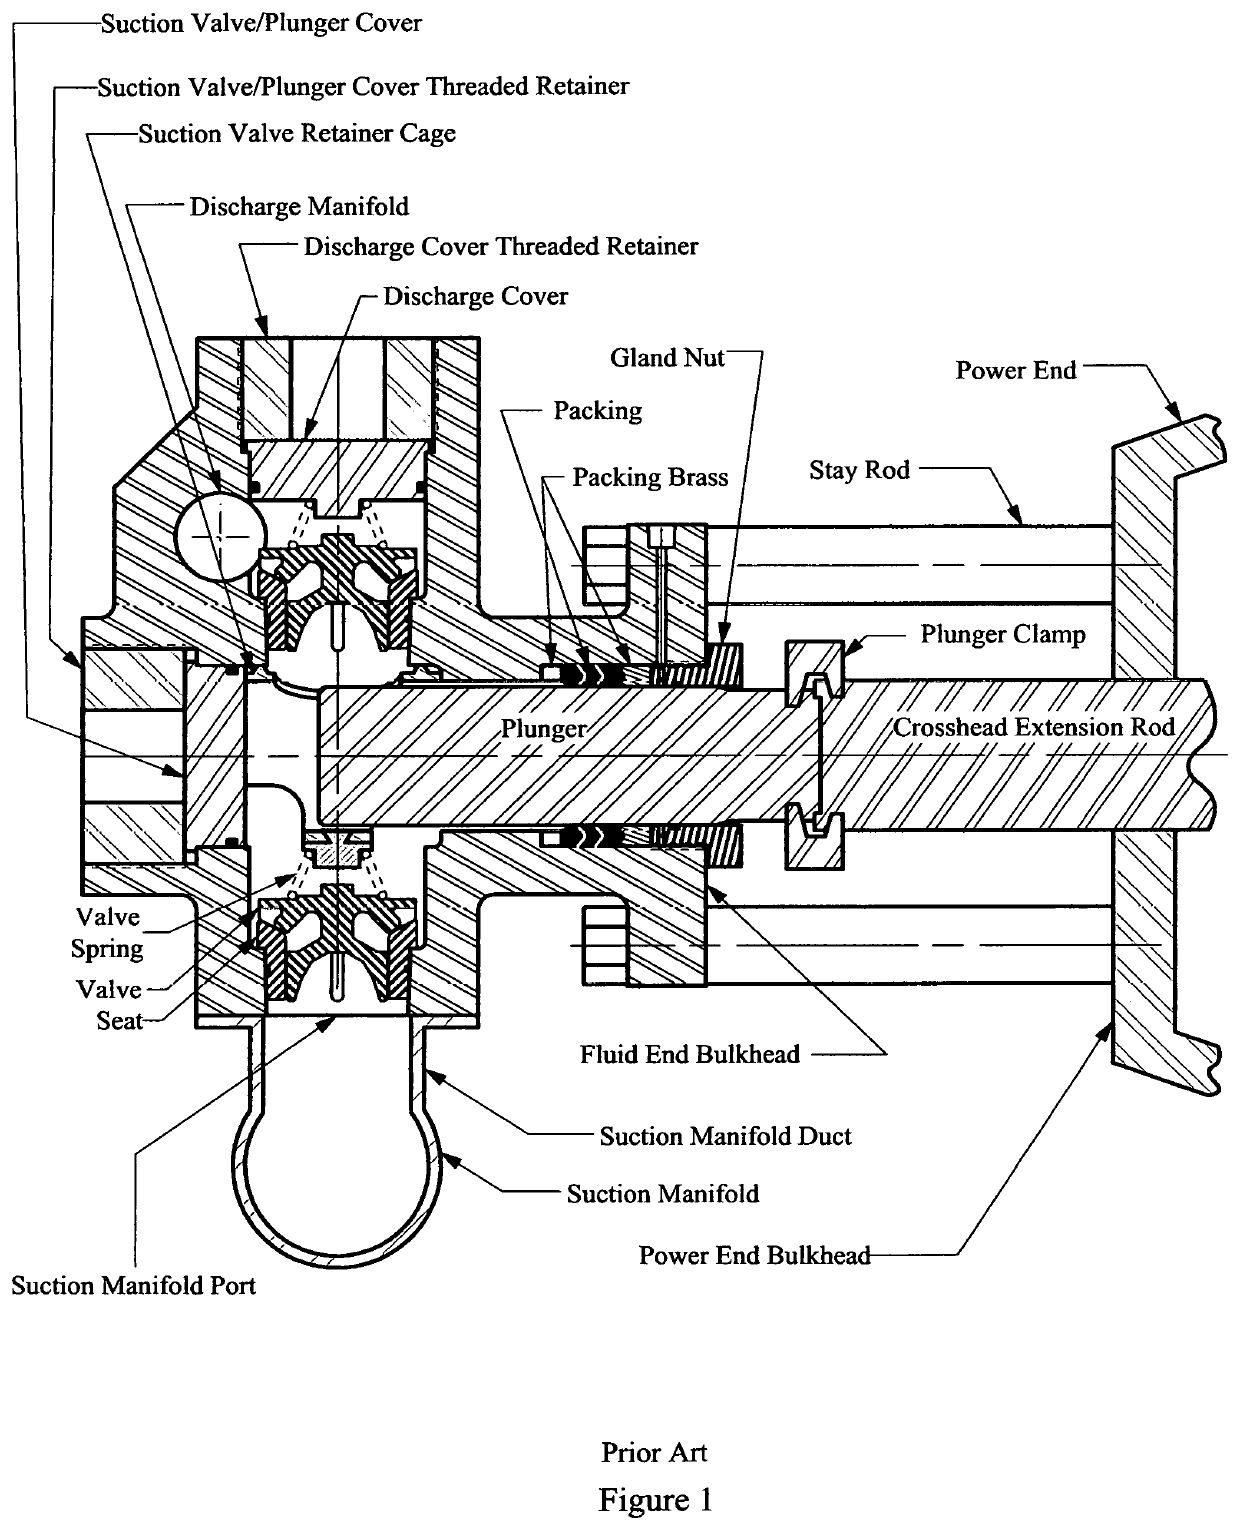 Pump with segmented fluid end housing and in-line valve